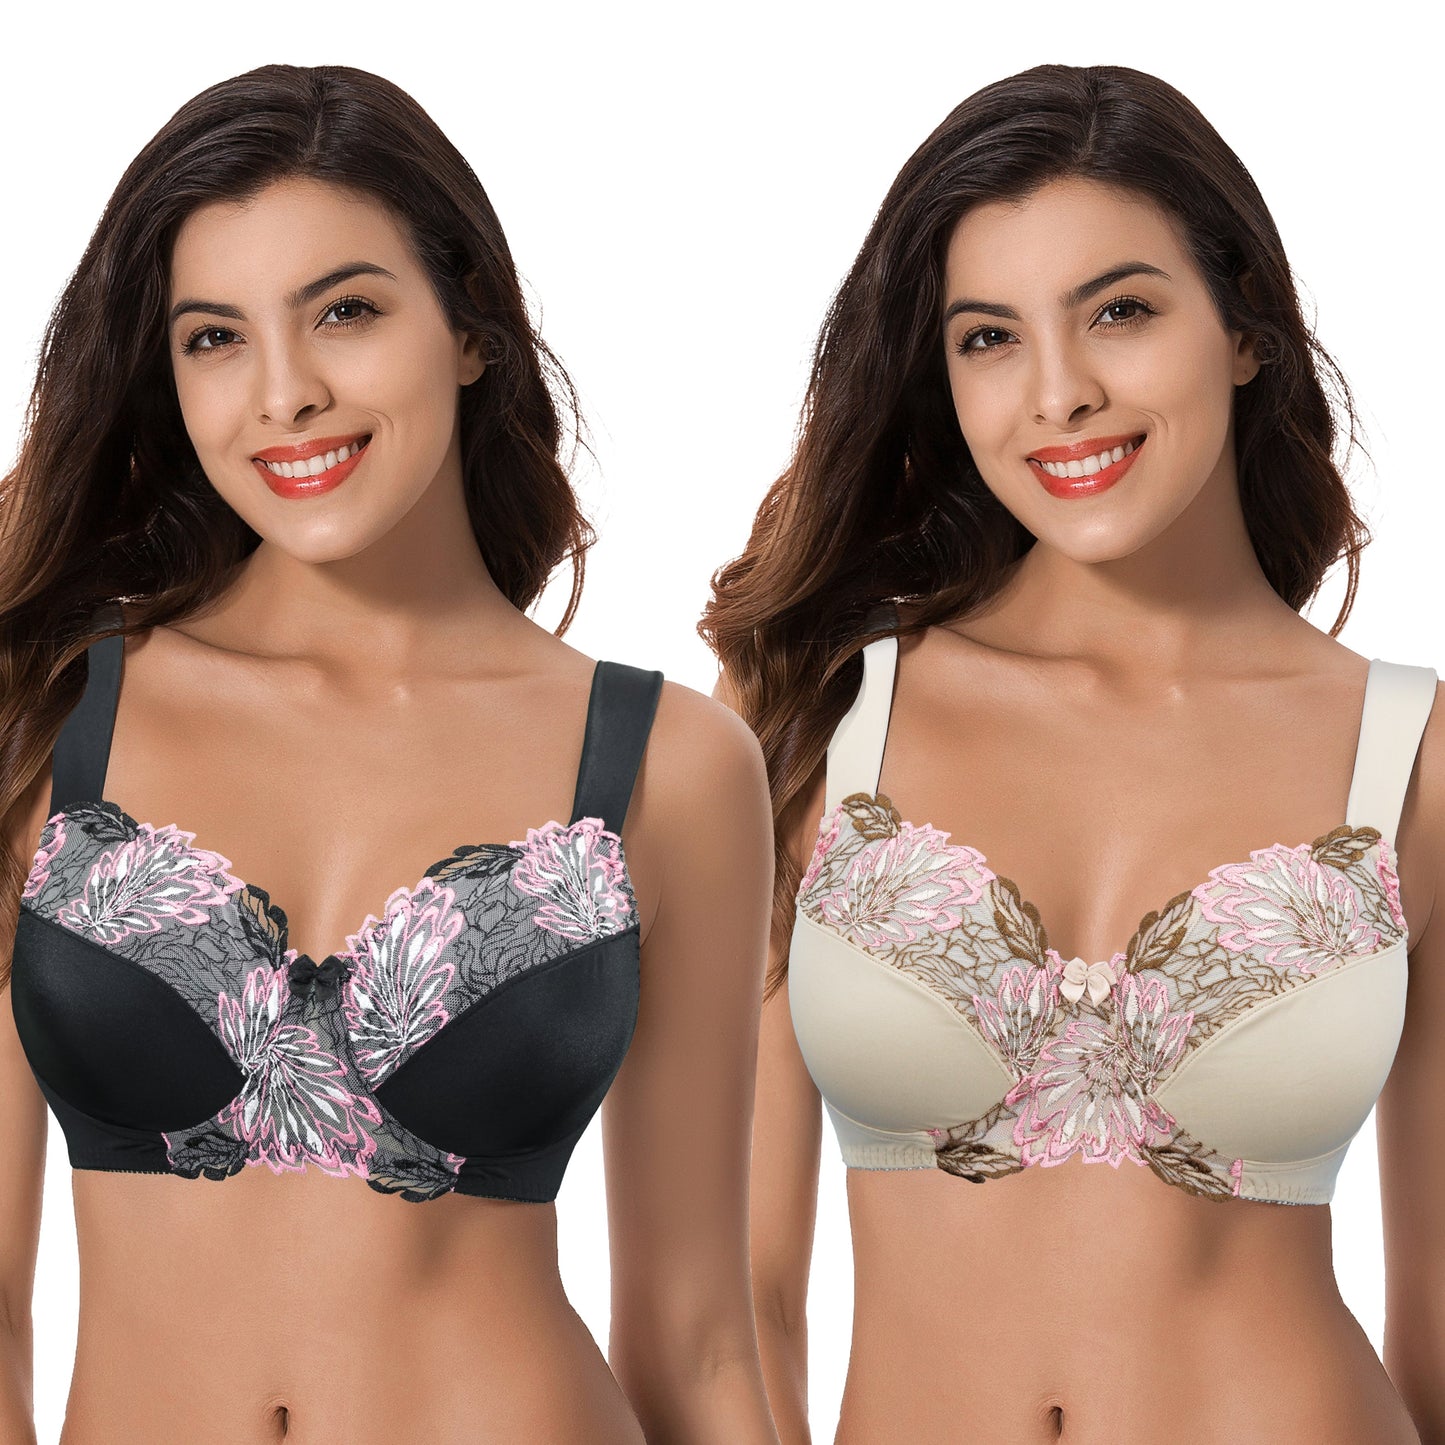 Women's Plus Size Minimizer Wireless Unlined Bra with Embroidery Lace